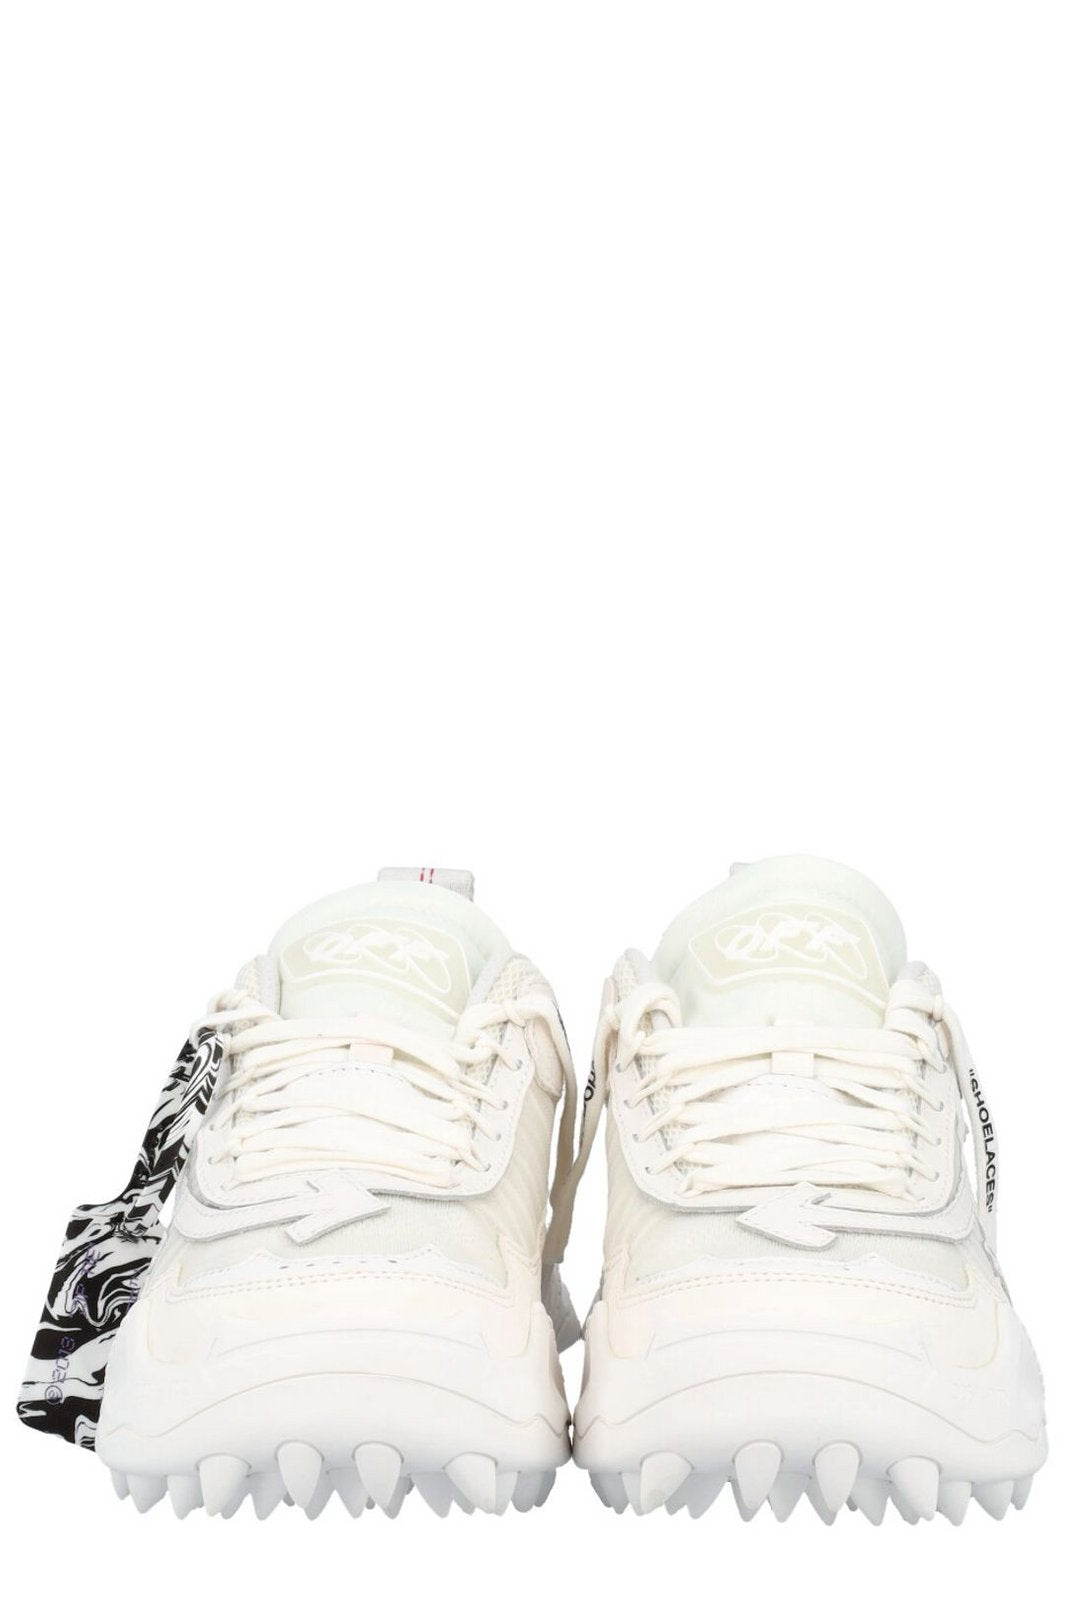 Off-White Odsy 1000 Low-Top Sneakers